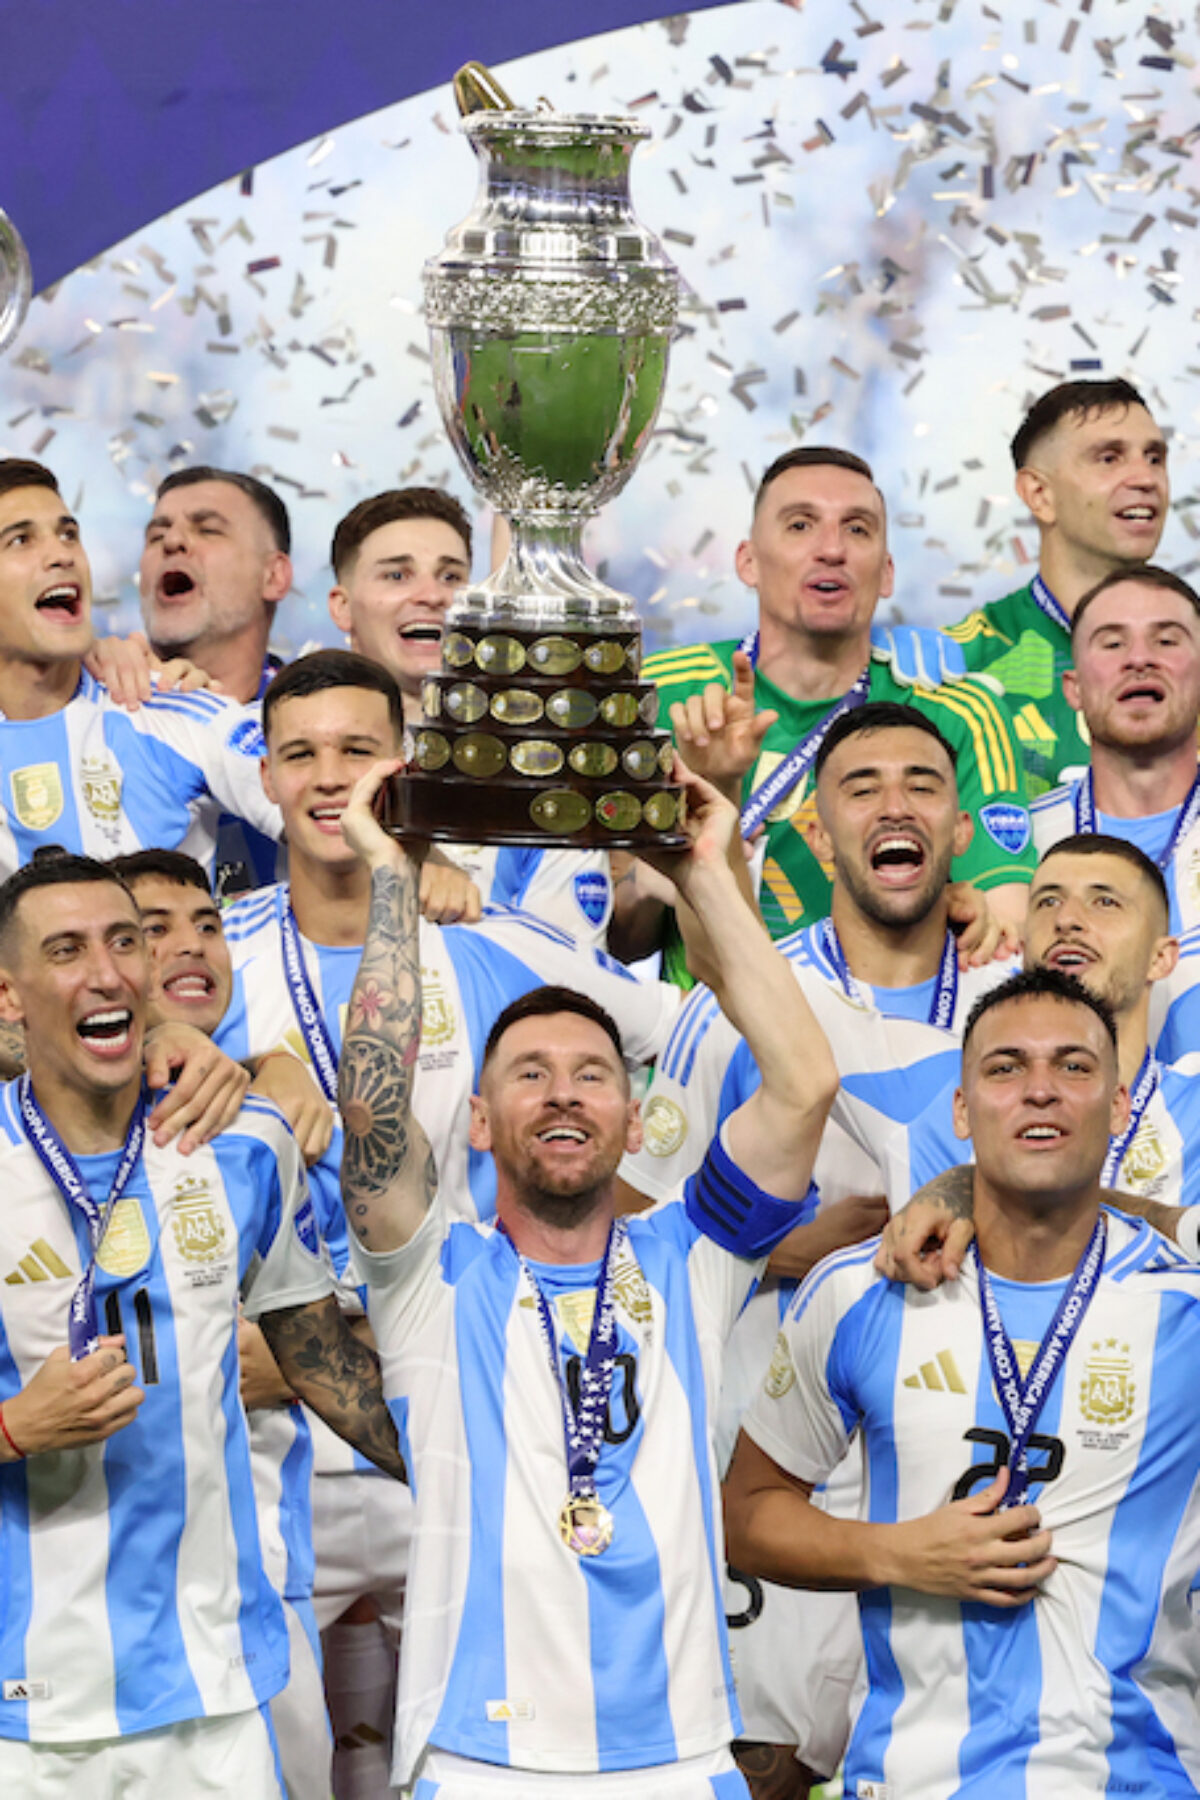 Argentina's forward #10 Lionel Messi lifts up the trophy.